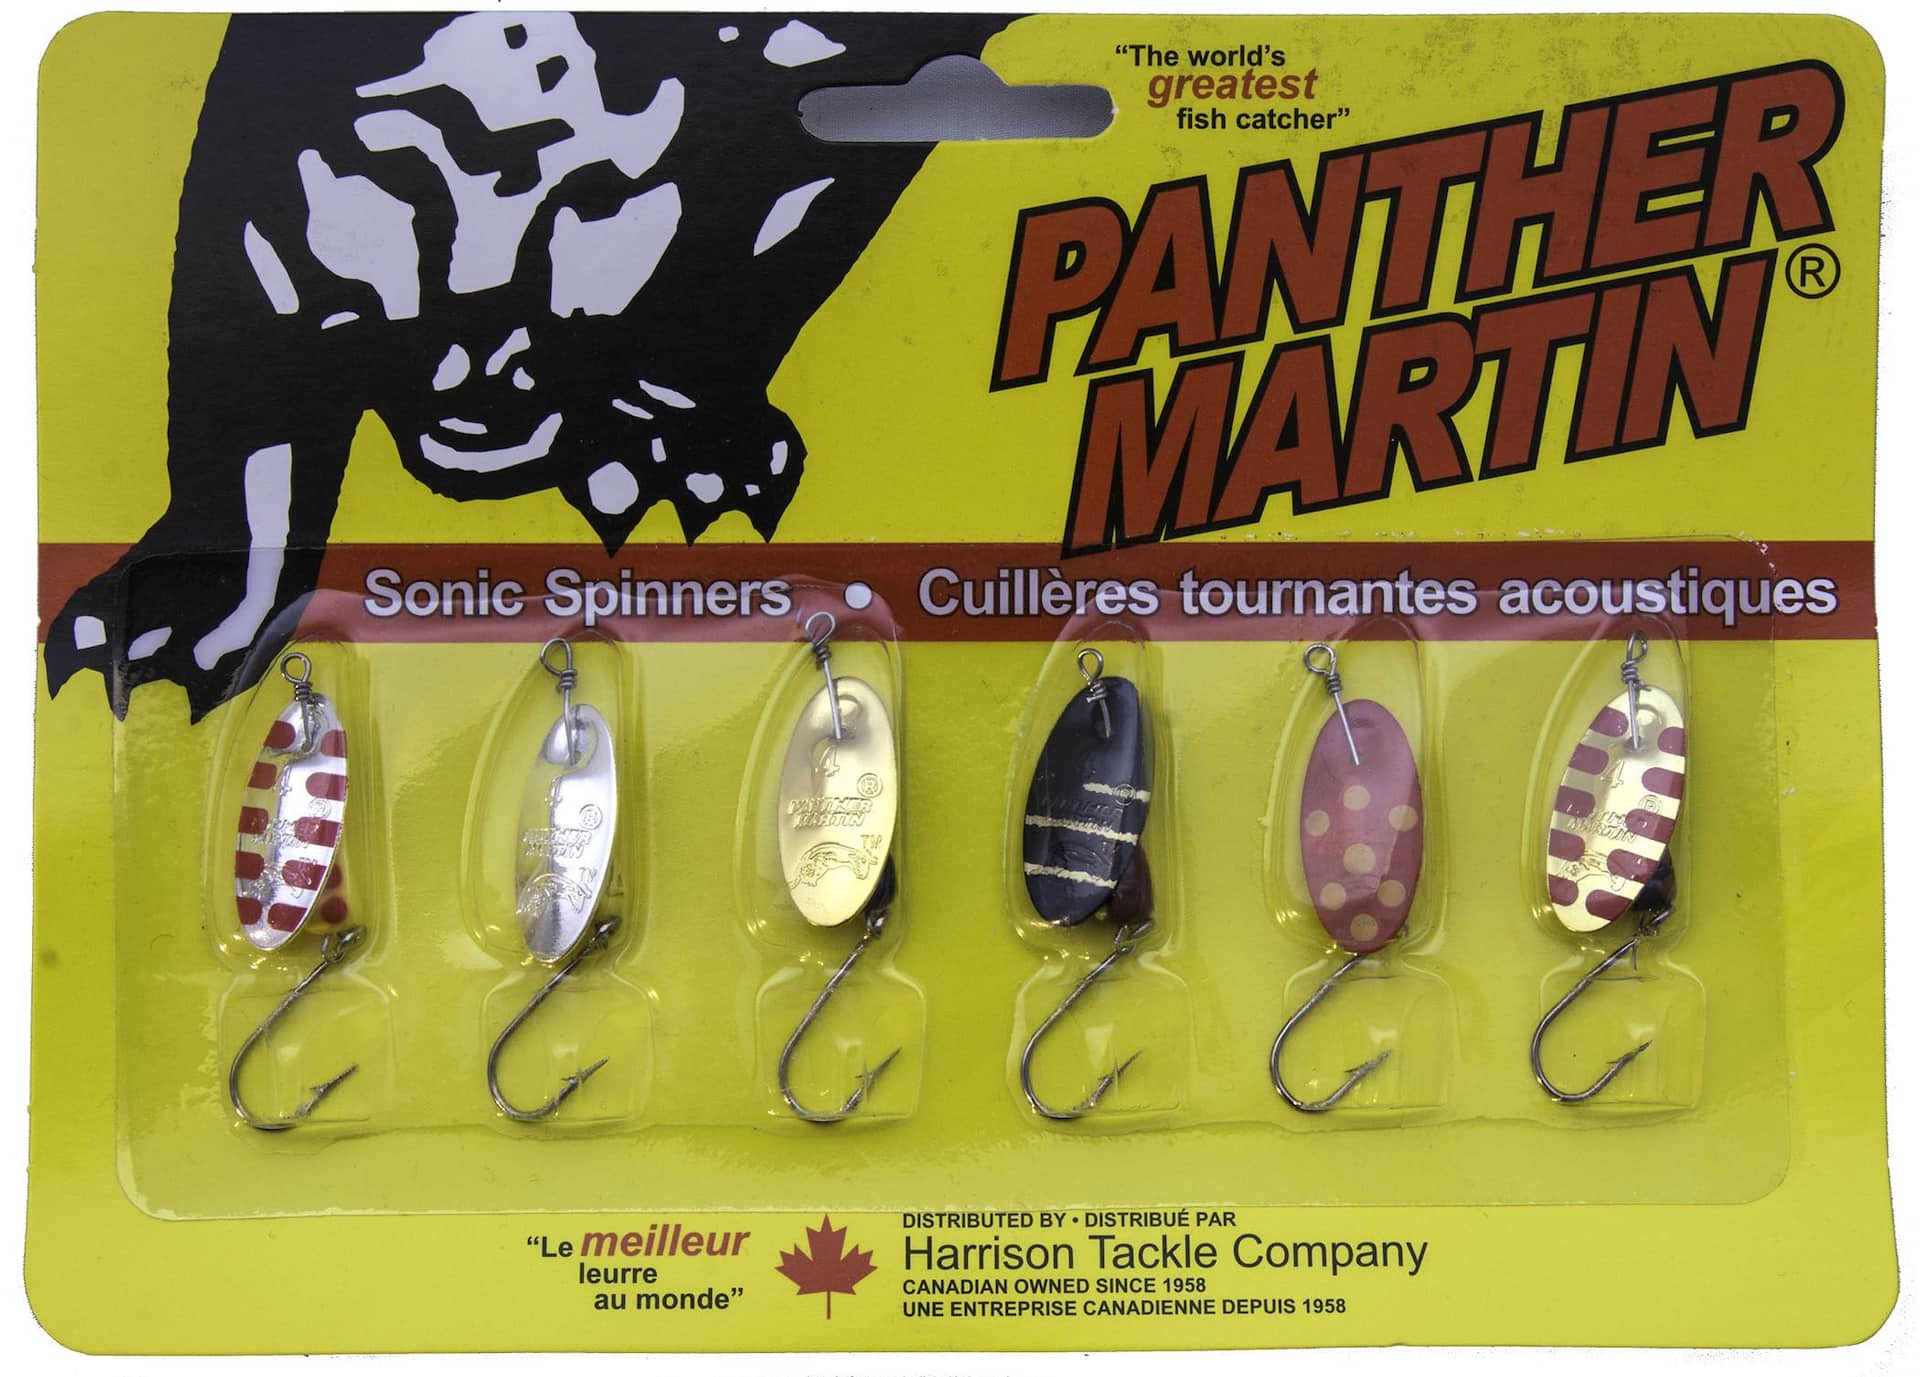 https://media-www.canadiantire.ca/product/playing/fishing/fishing-lures/0789213/panther-martin-classic-trout-single-kit-1-8oz-6-pack-6d1392c6-01b6-4985-adba-3817049a3090-jpgrendition.jpg